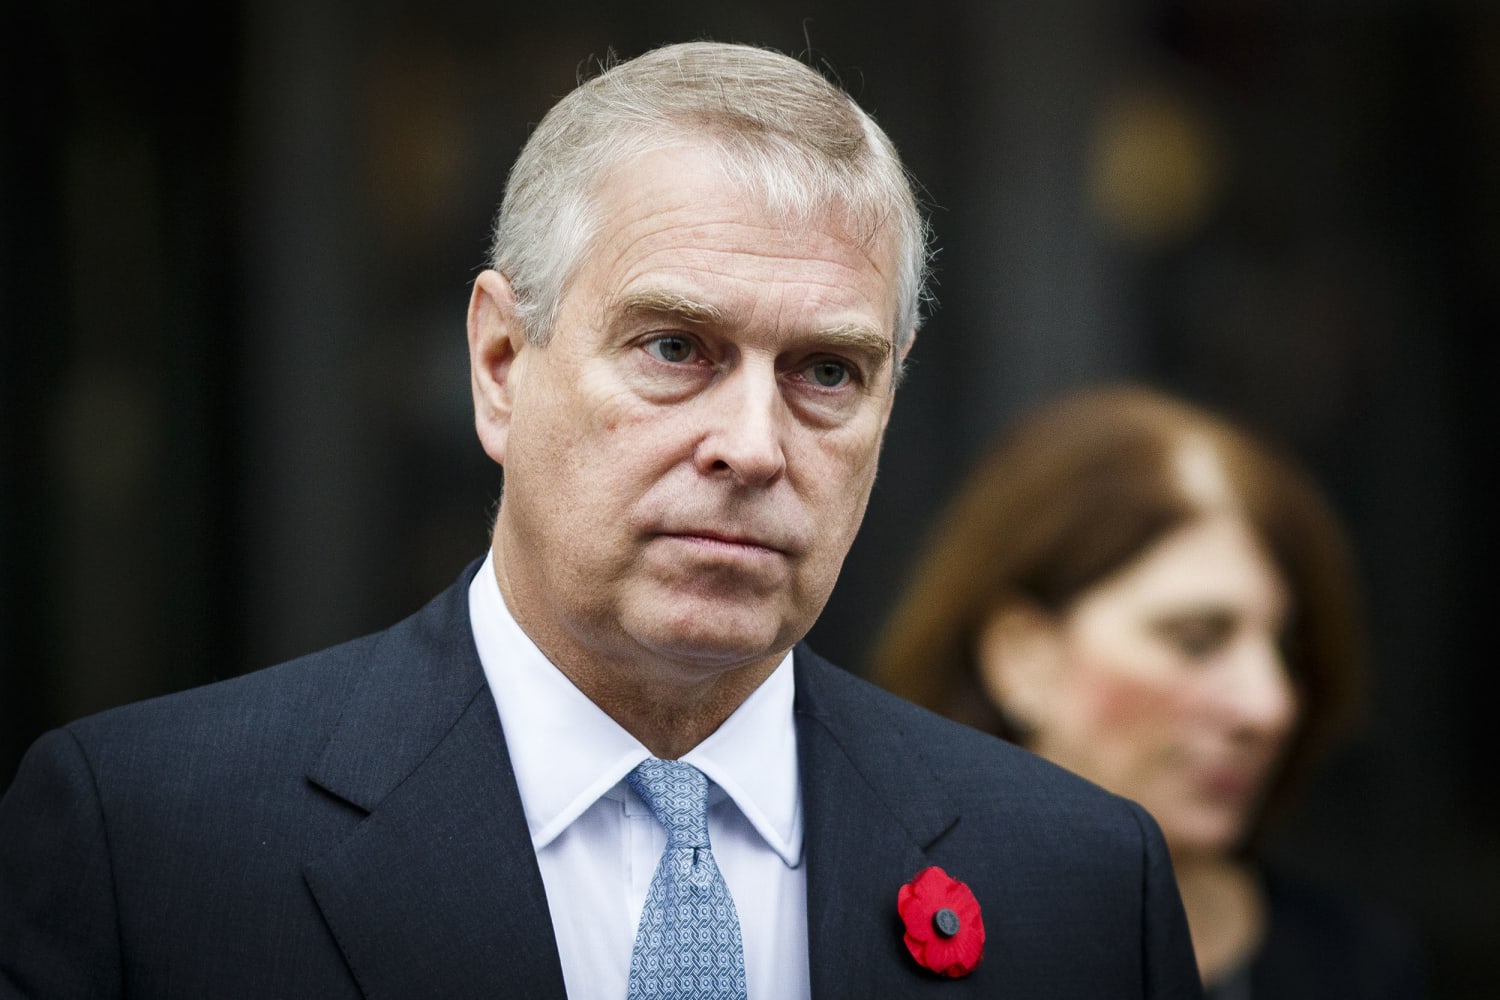 Prince Andrew Says He Let The Royal Family Down In His Relationship With Jeffrey Epstein